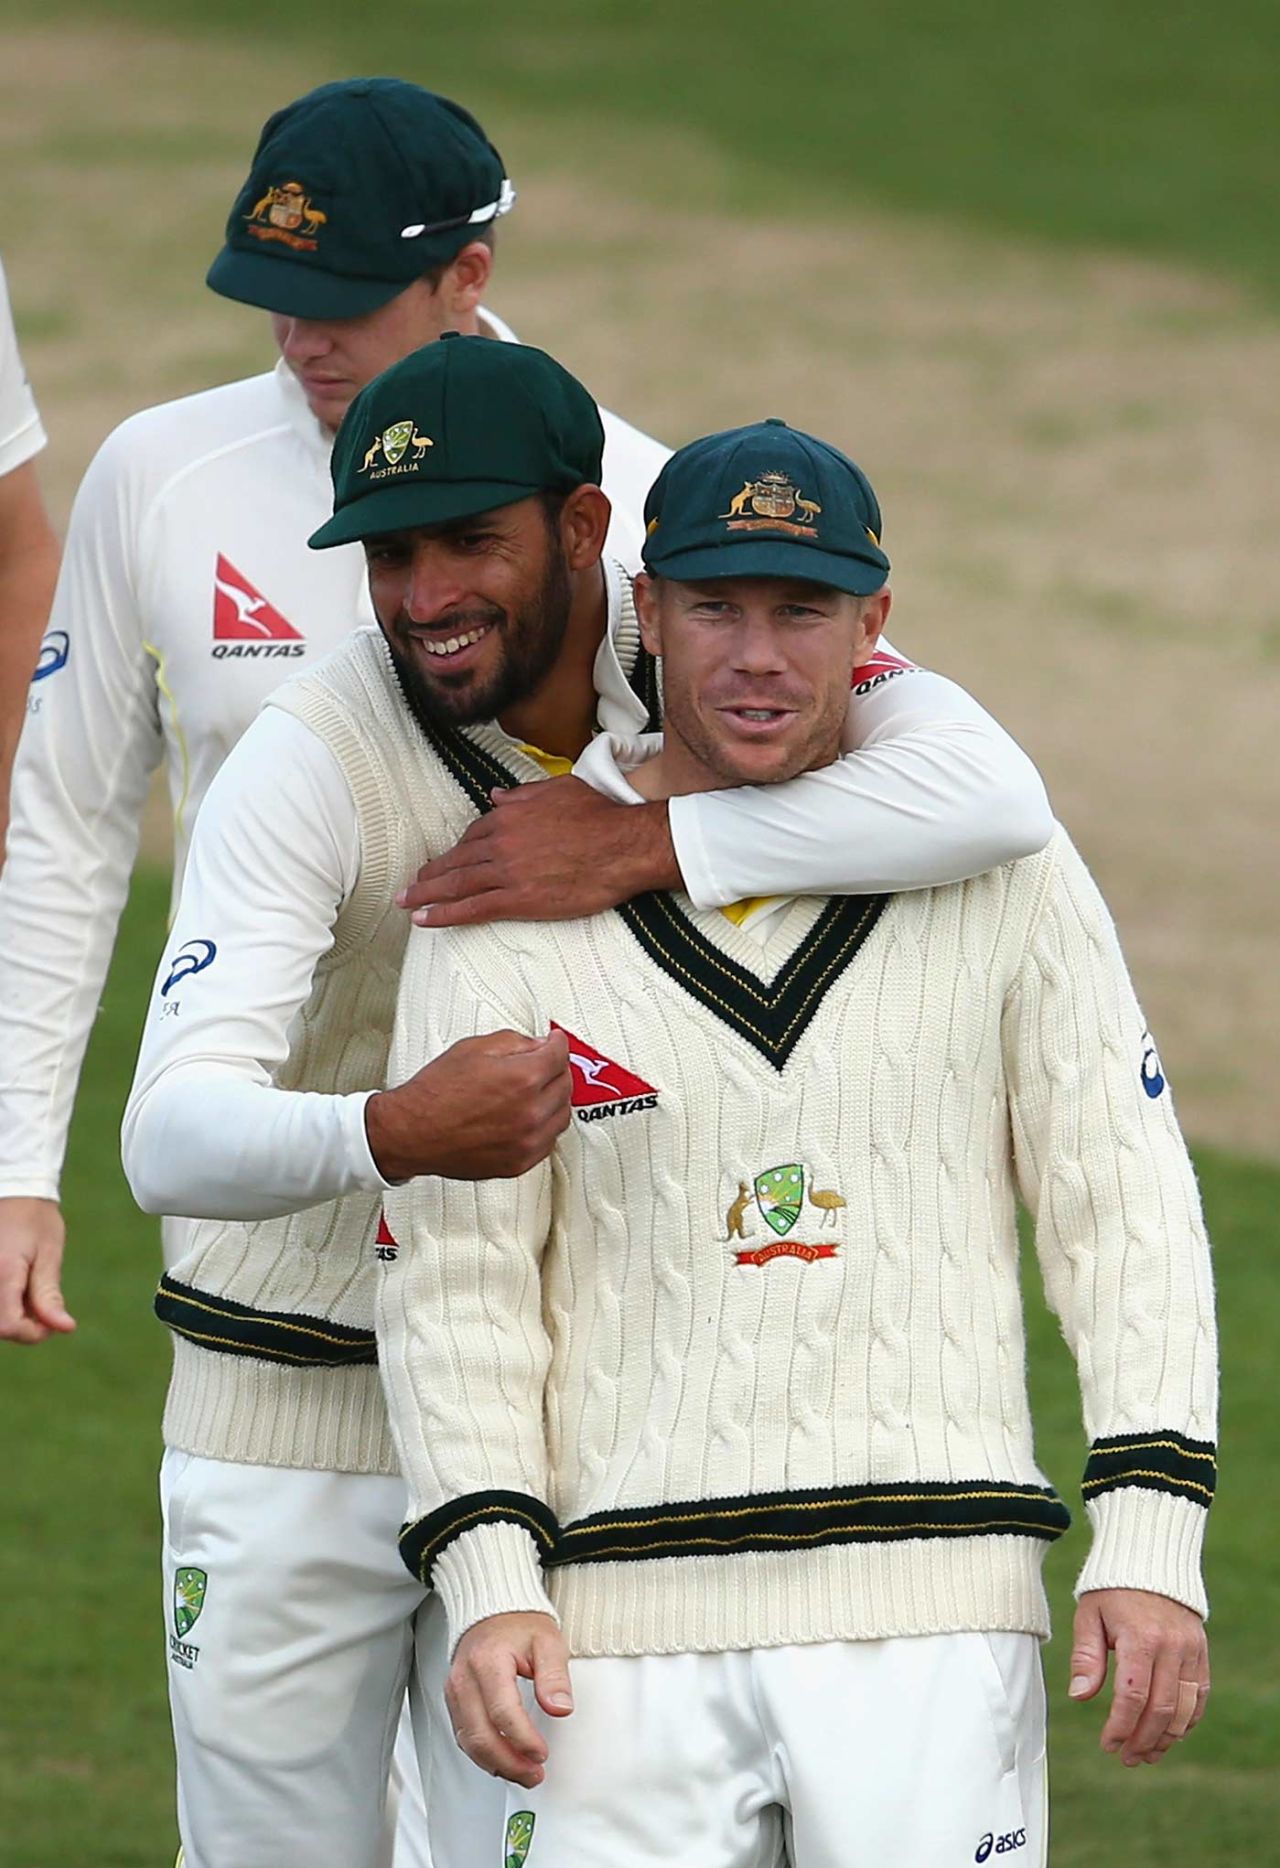 Fawad Ahmed puts his arm around David Warner as they leave the field, Northamptonshire v Australians, day two, Northampton, August 15, 2015